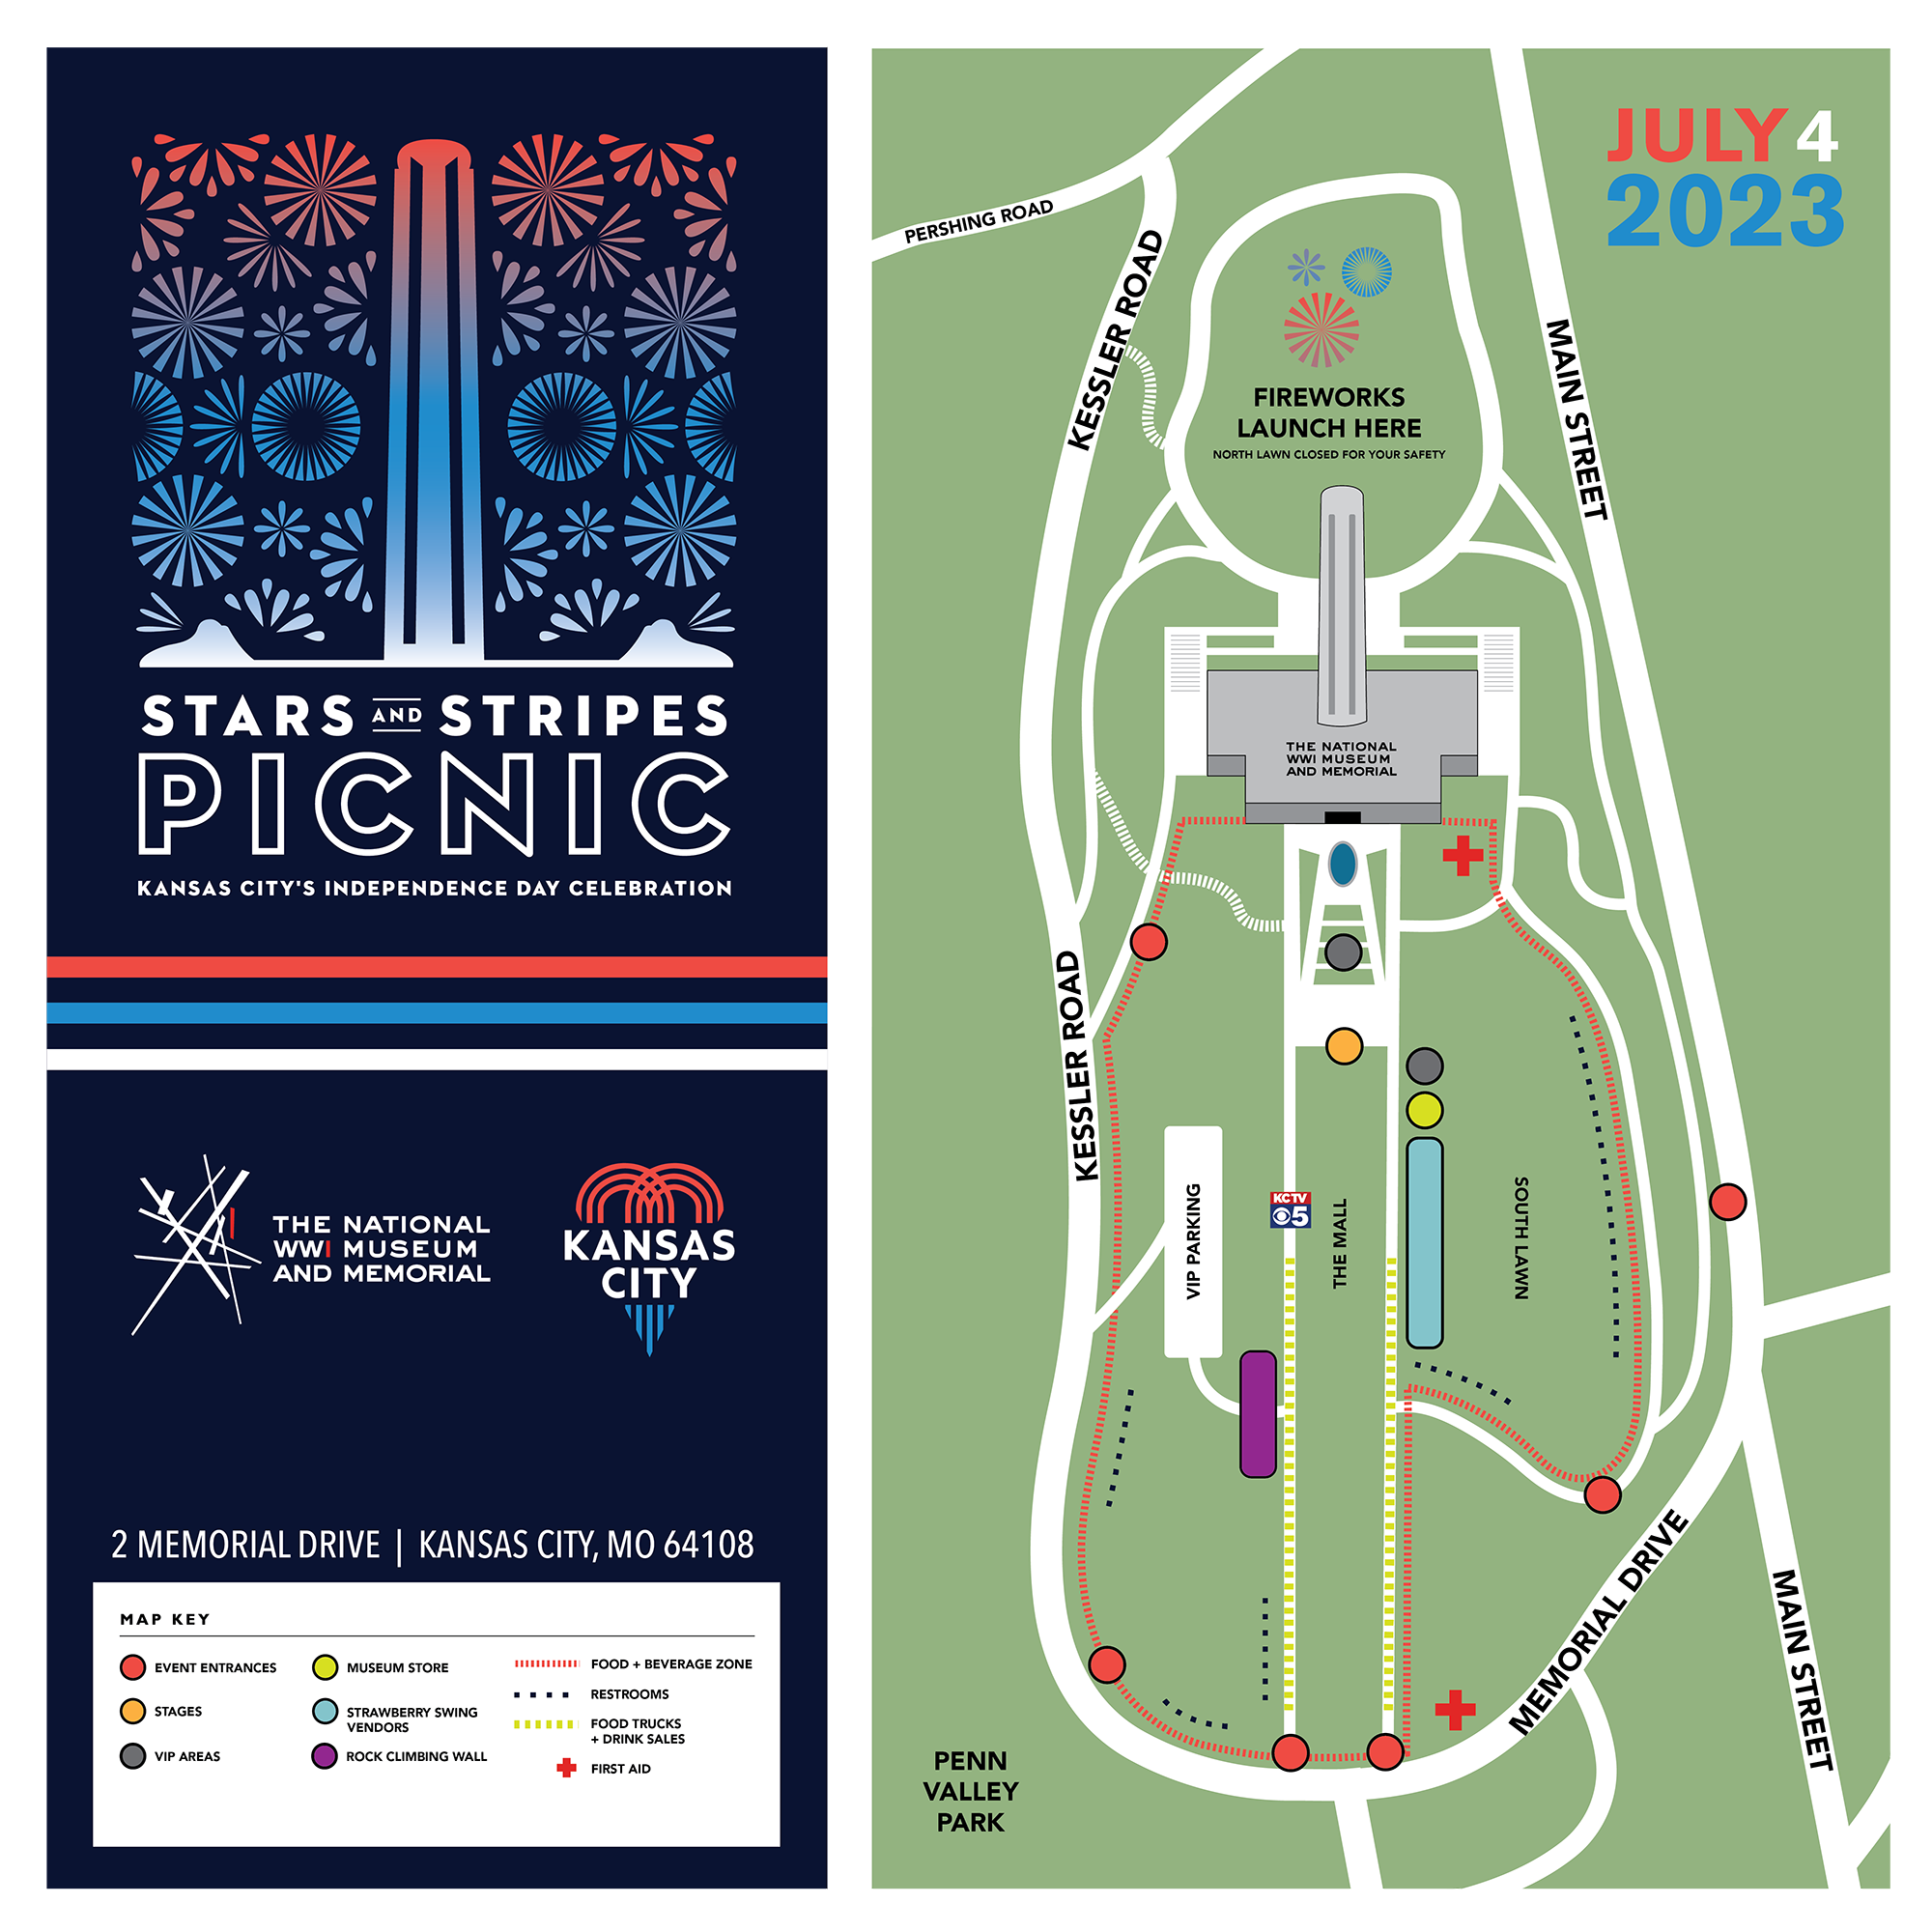 Map of Museum grounds with locations of first aid, food, entrances, parking and fireworks.